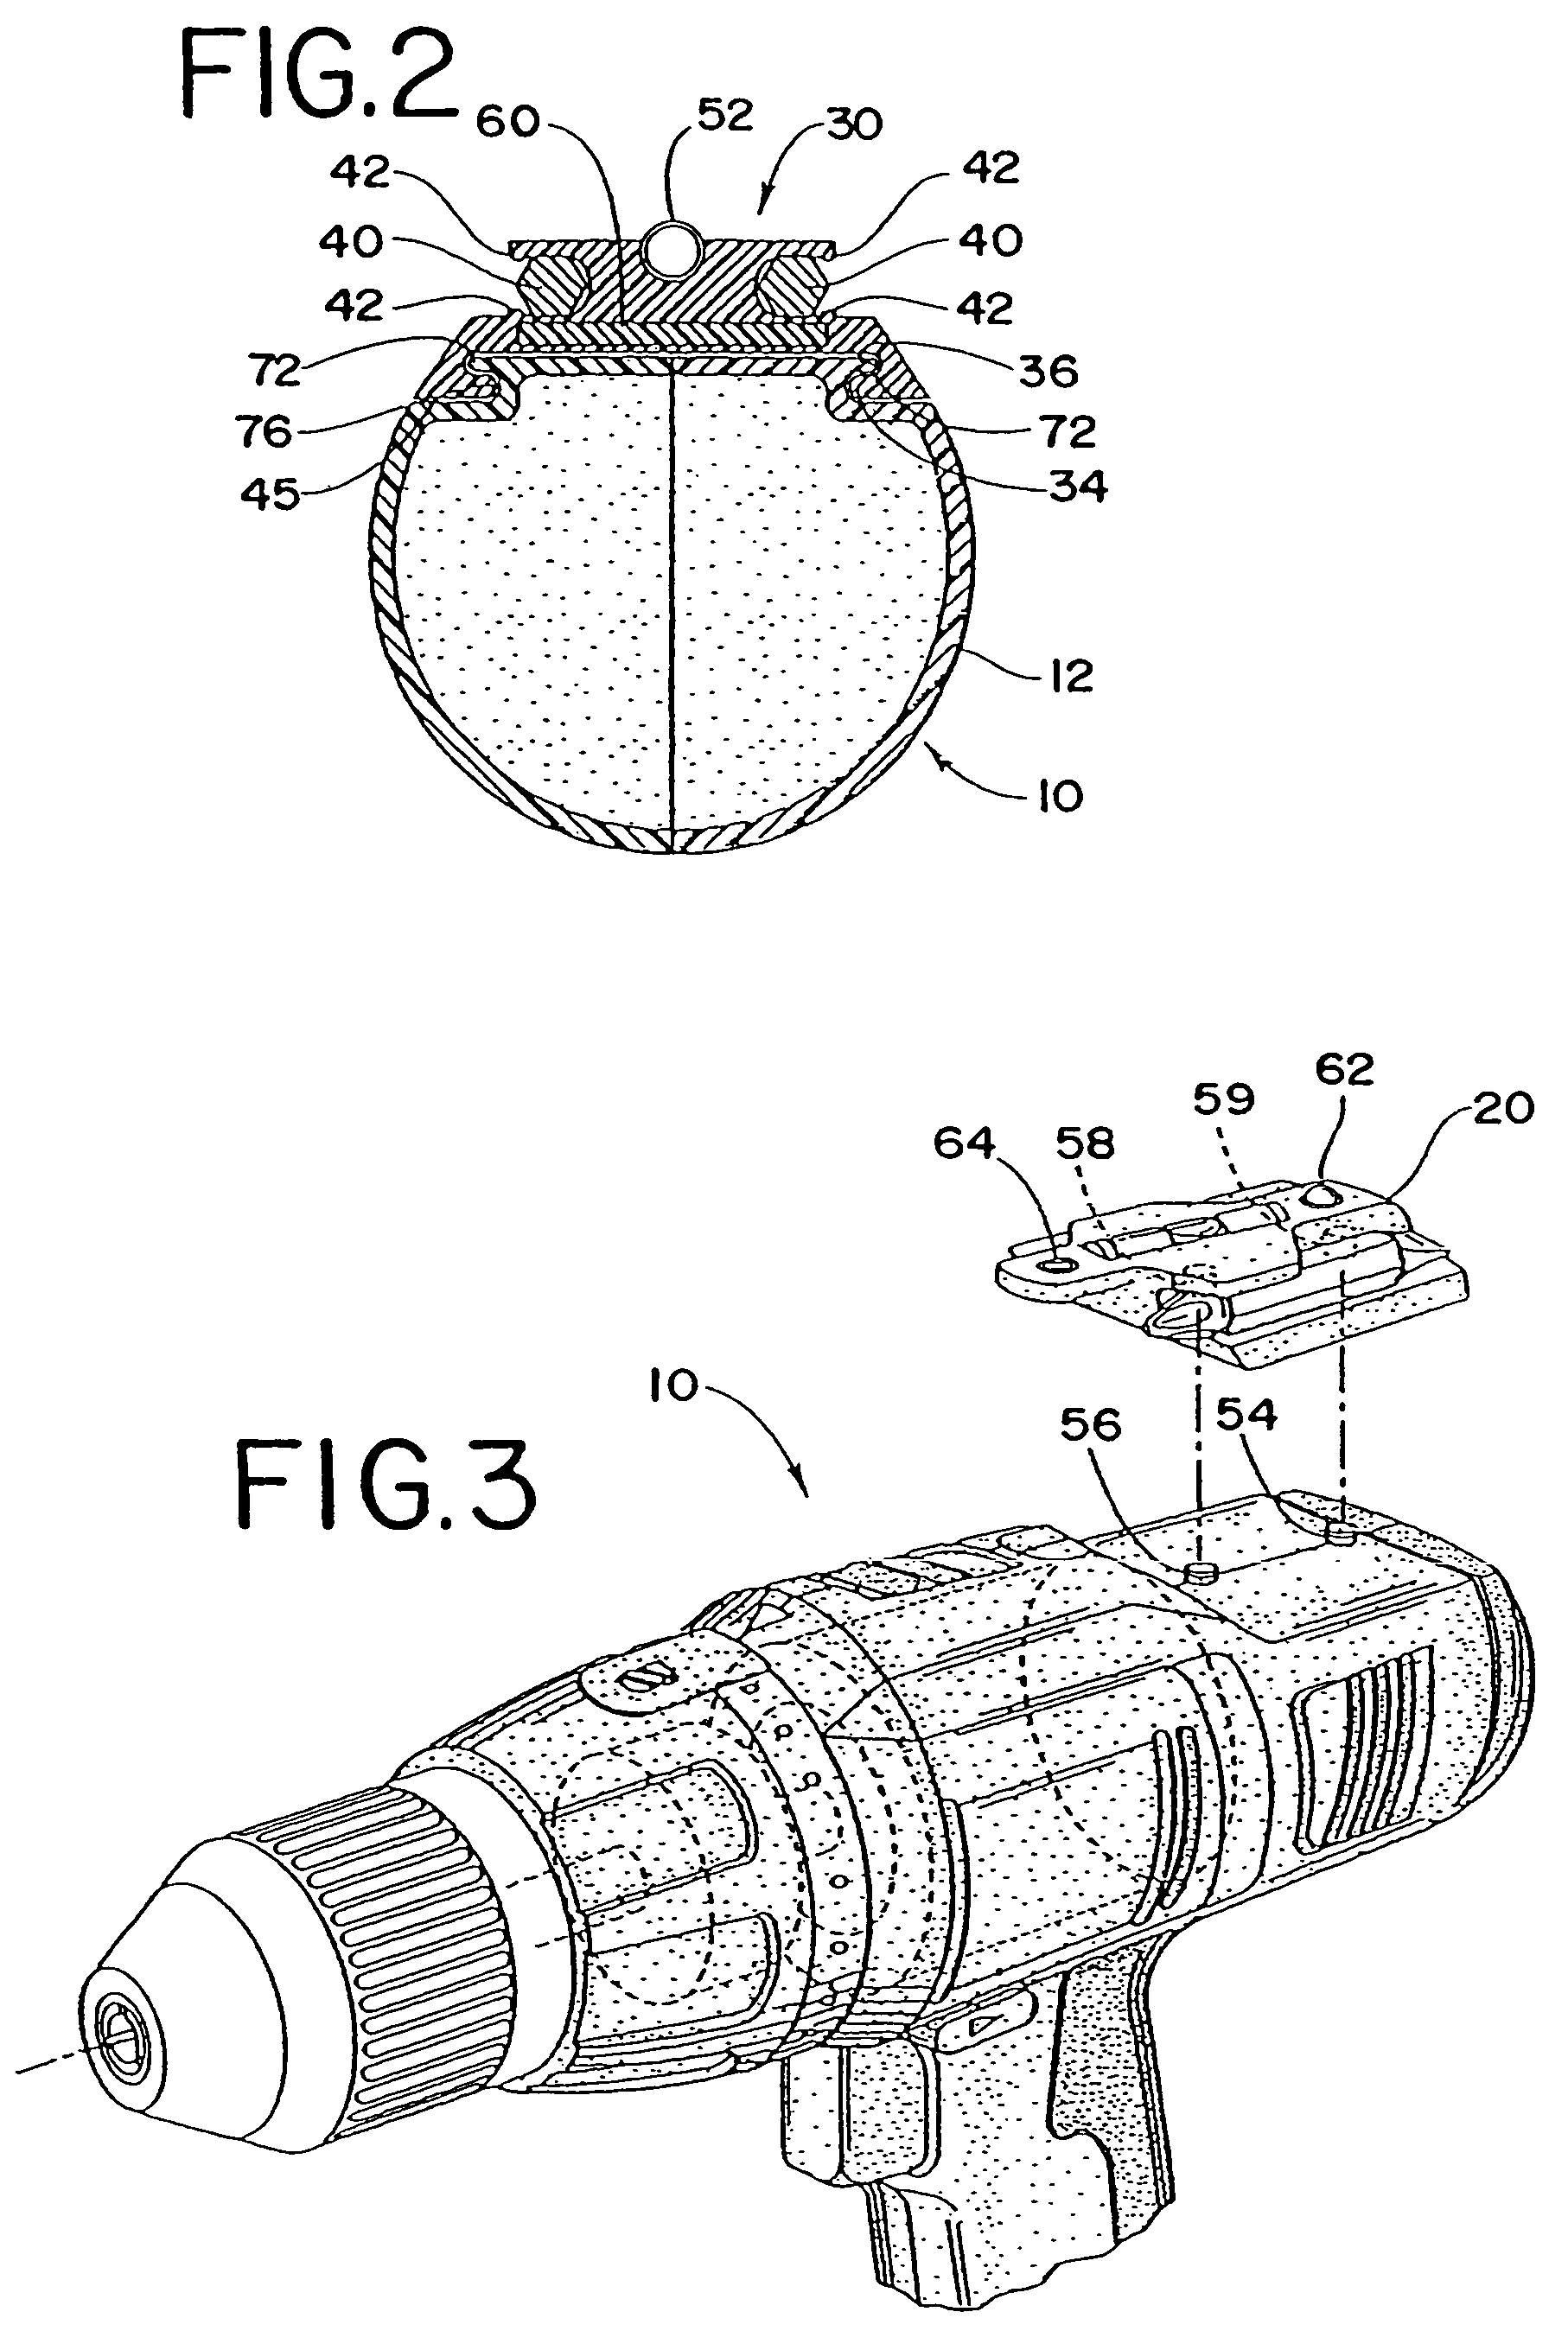 Hand-held tool with a removable object sensor